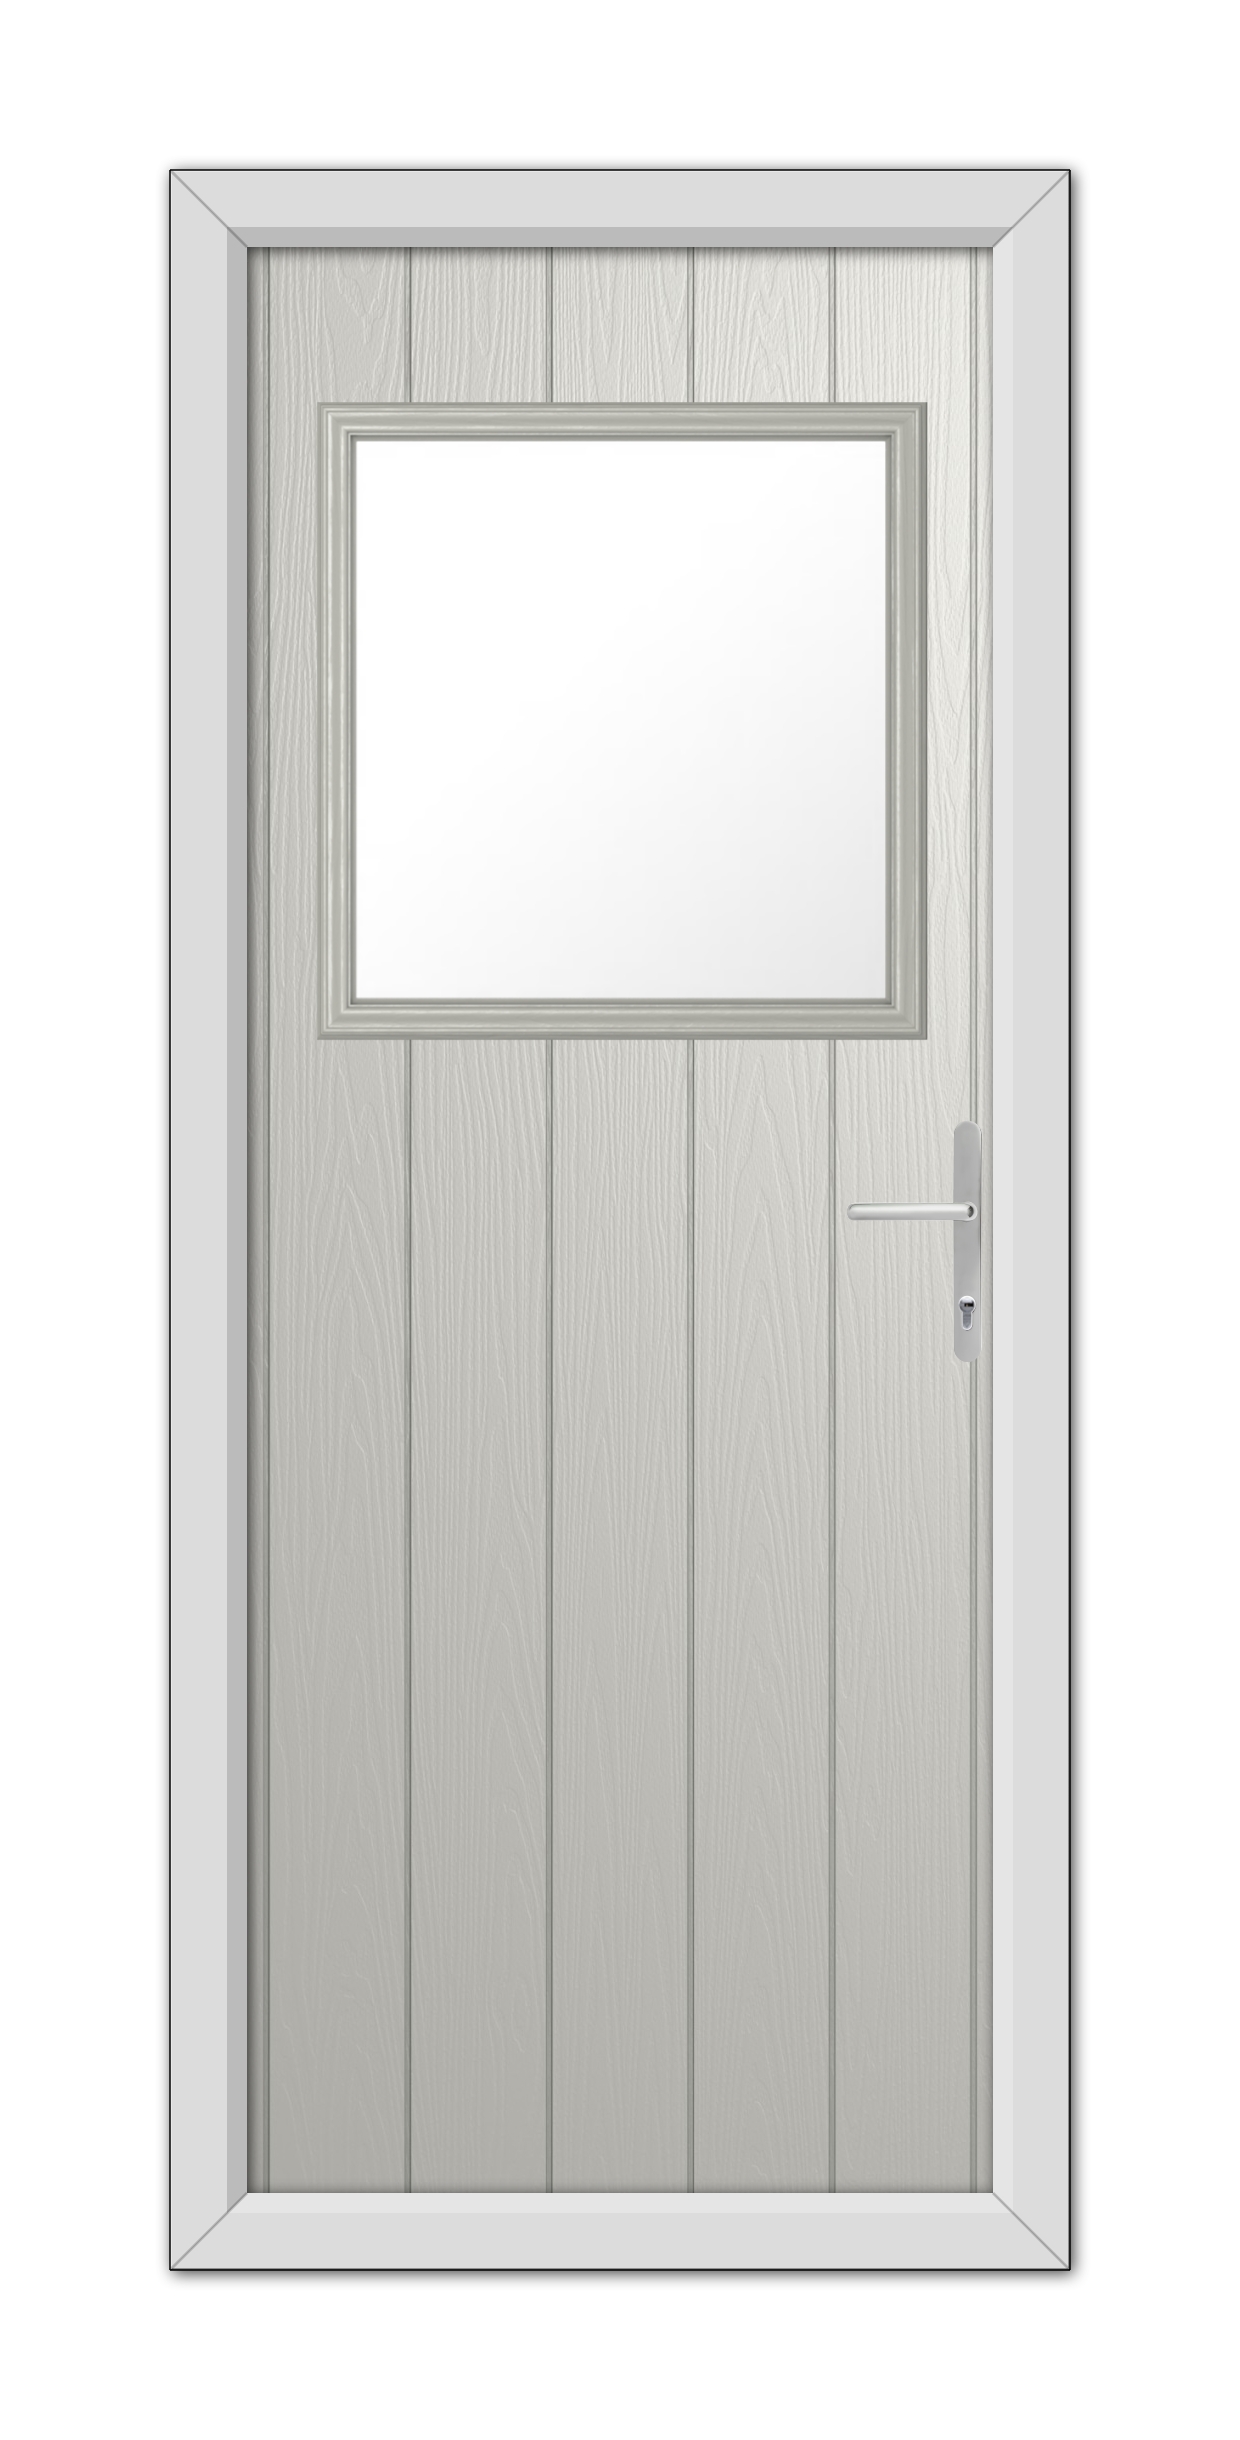 A modern Agate Grey Fife Composite Door 48mm Timber Core featuring a rectangular glass window at the top and a metal handle on the right side.